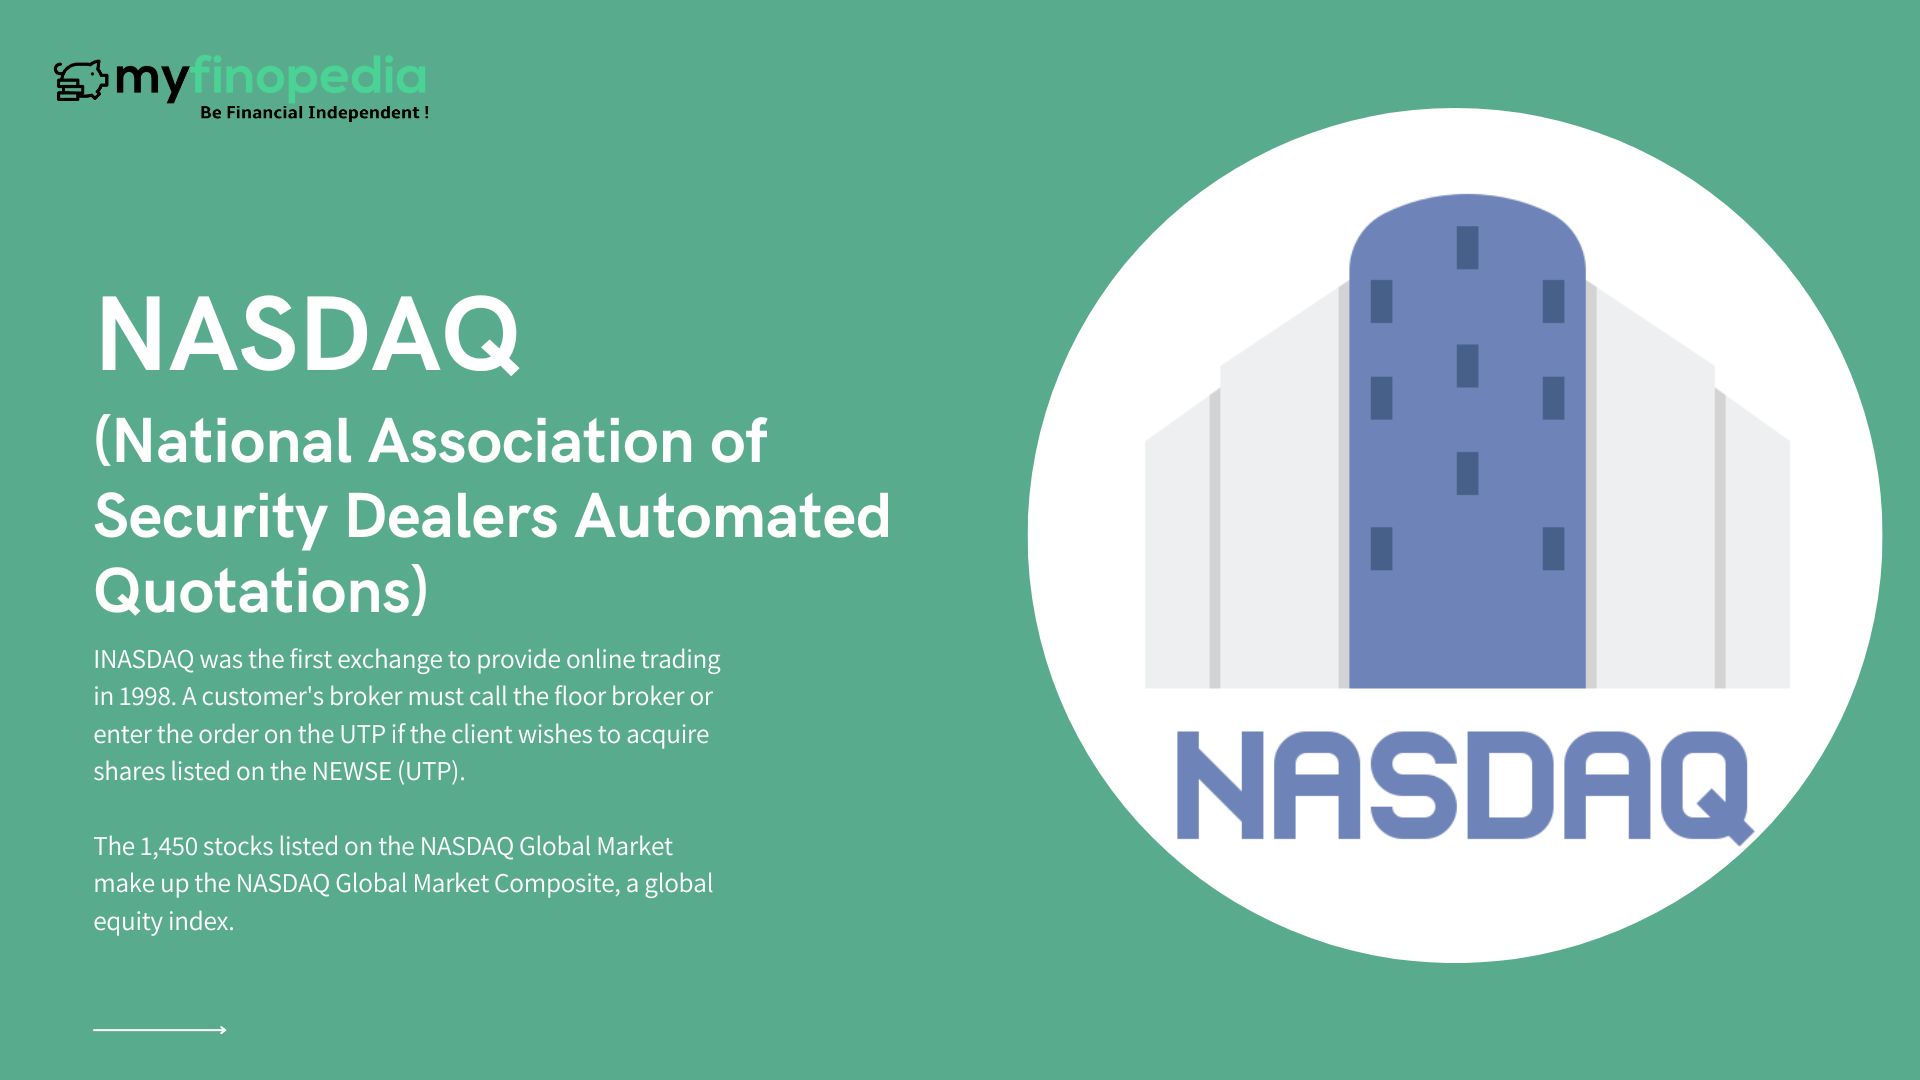 National Association of Security Dealers Automated Quotations (NASDAQ)